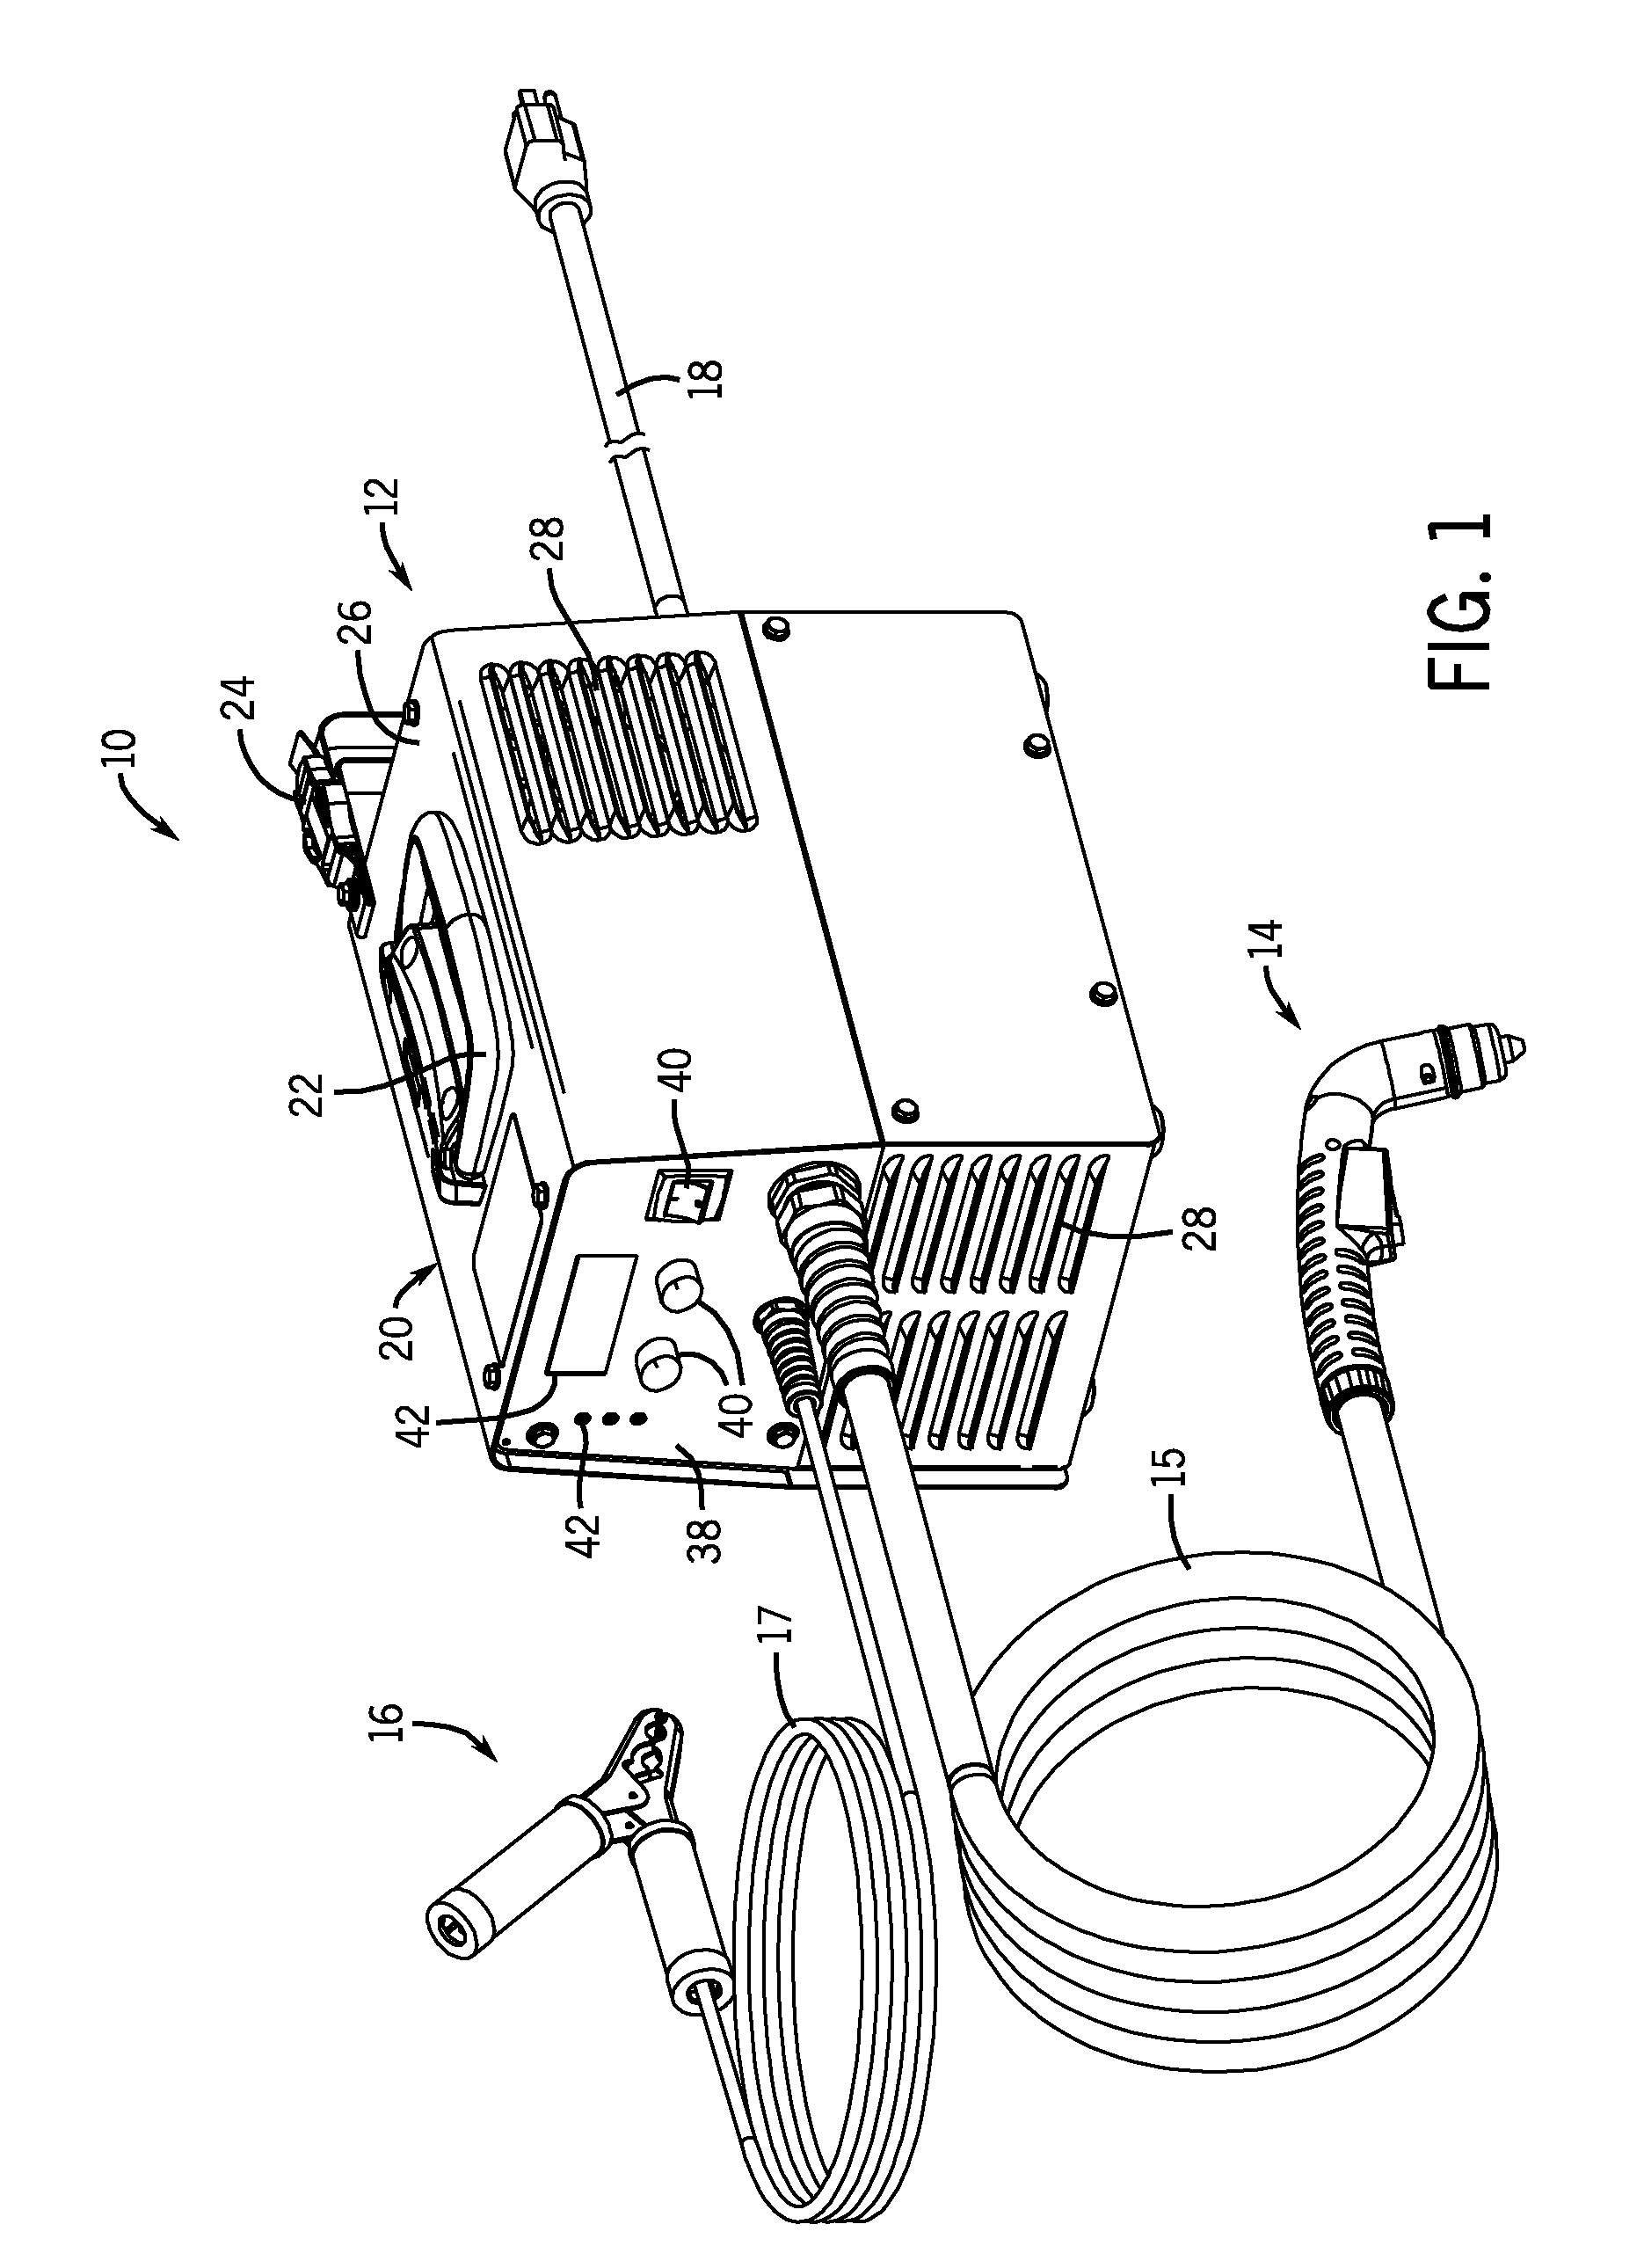 Plasma Cutter Having Thermal Model for Component Protection